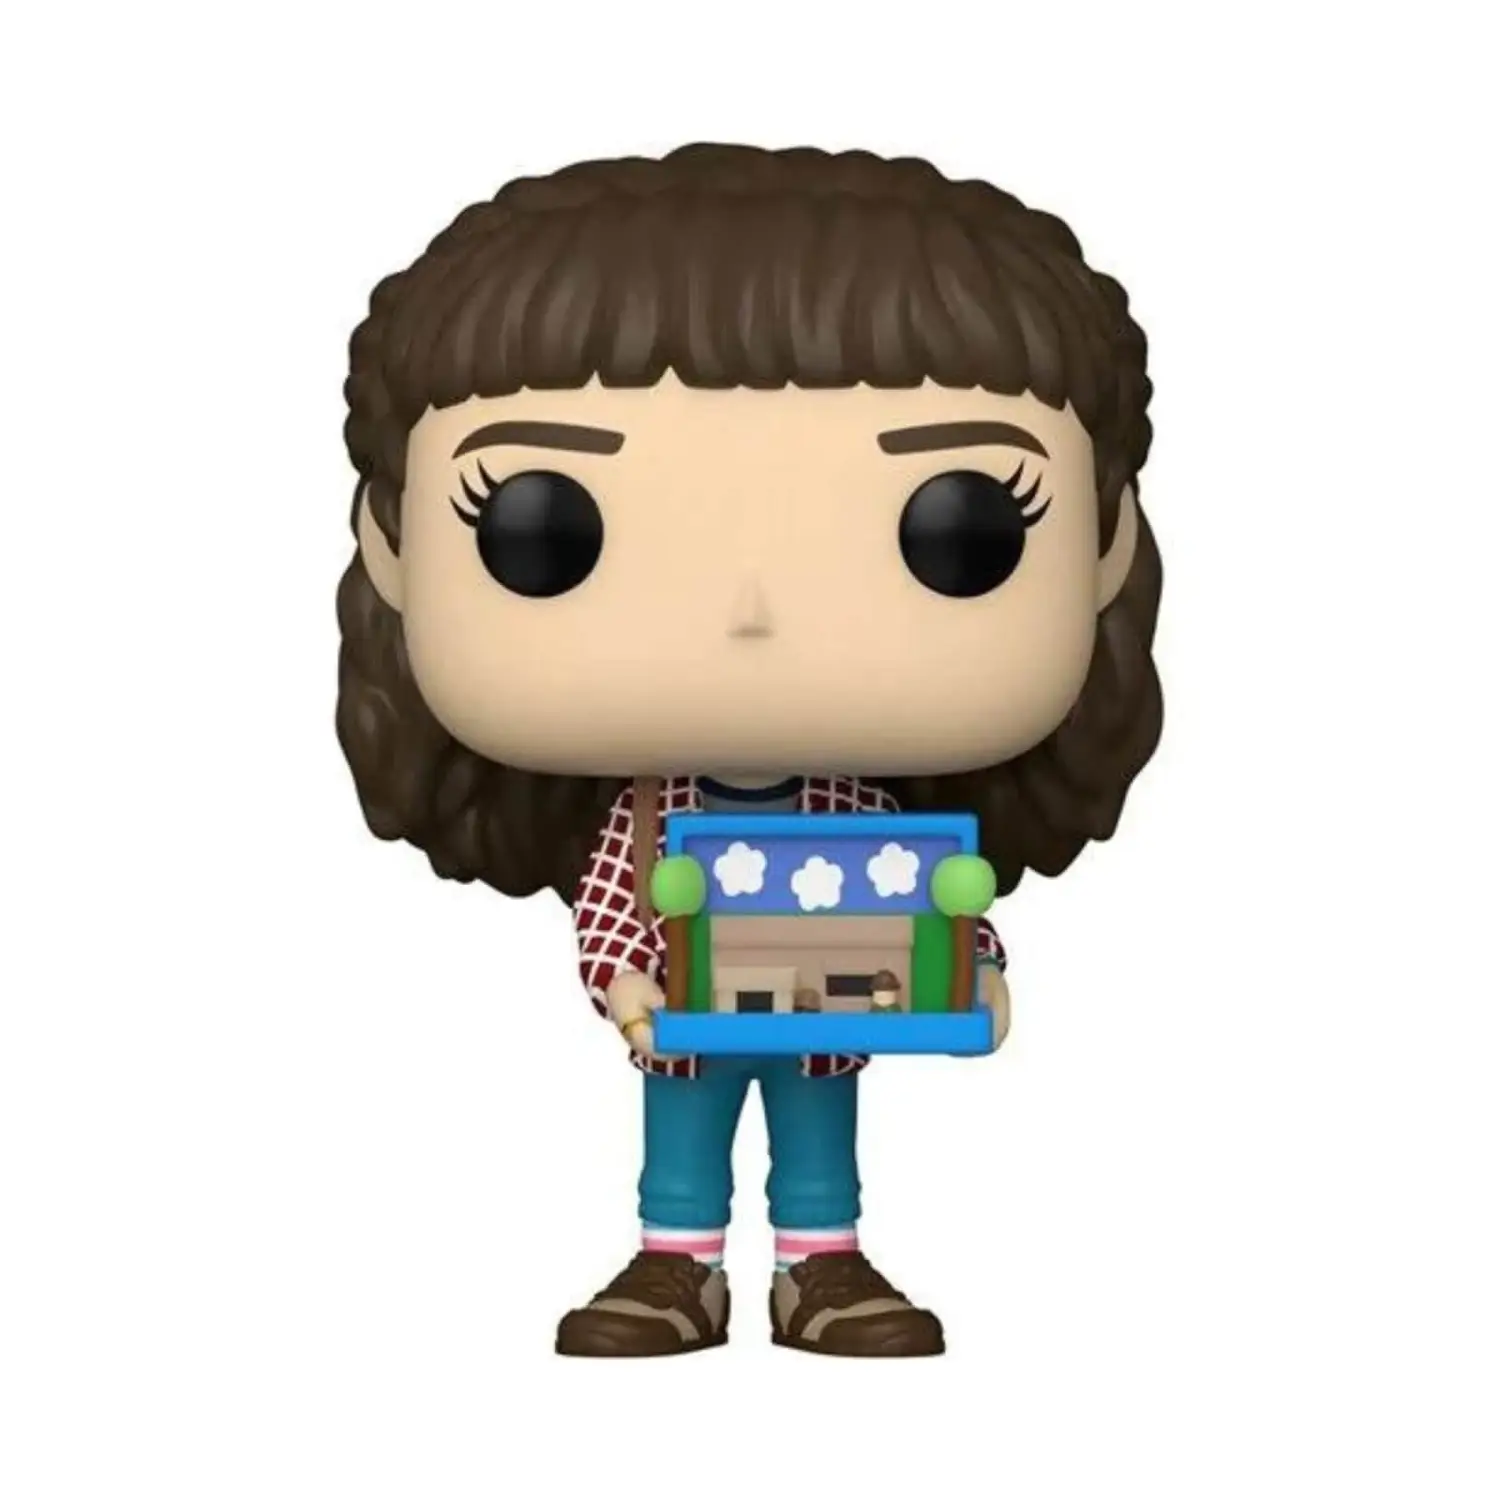 POP! TELEVISION #??? PVC STRANGER THINGS ELEVEN 4TH W/DIORAMA